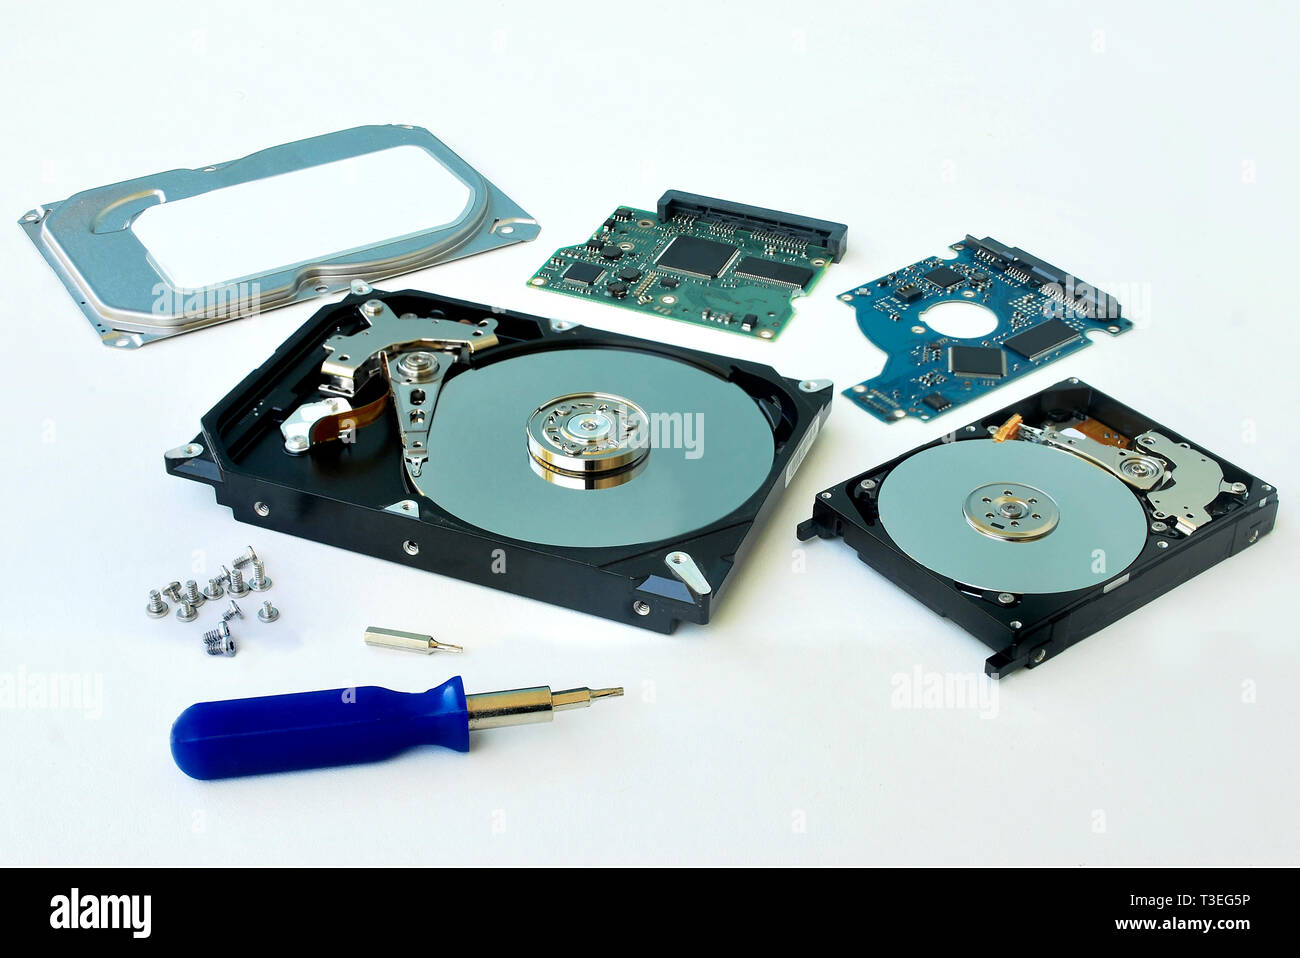 Harddisk.Repair disk.hdd appliances Stock Photo - Alamy